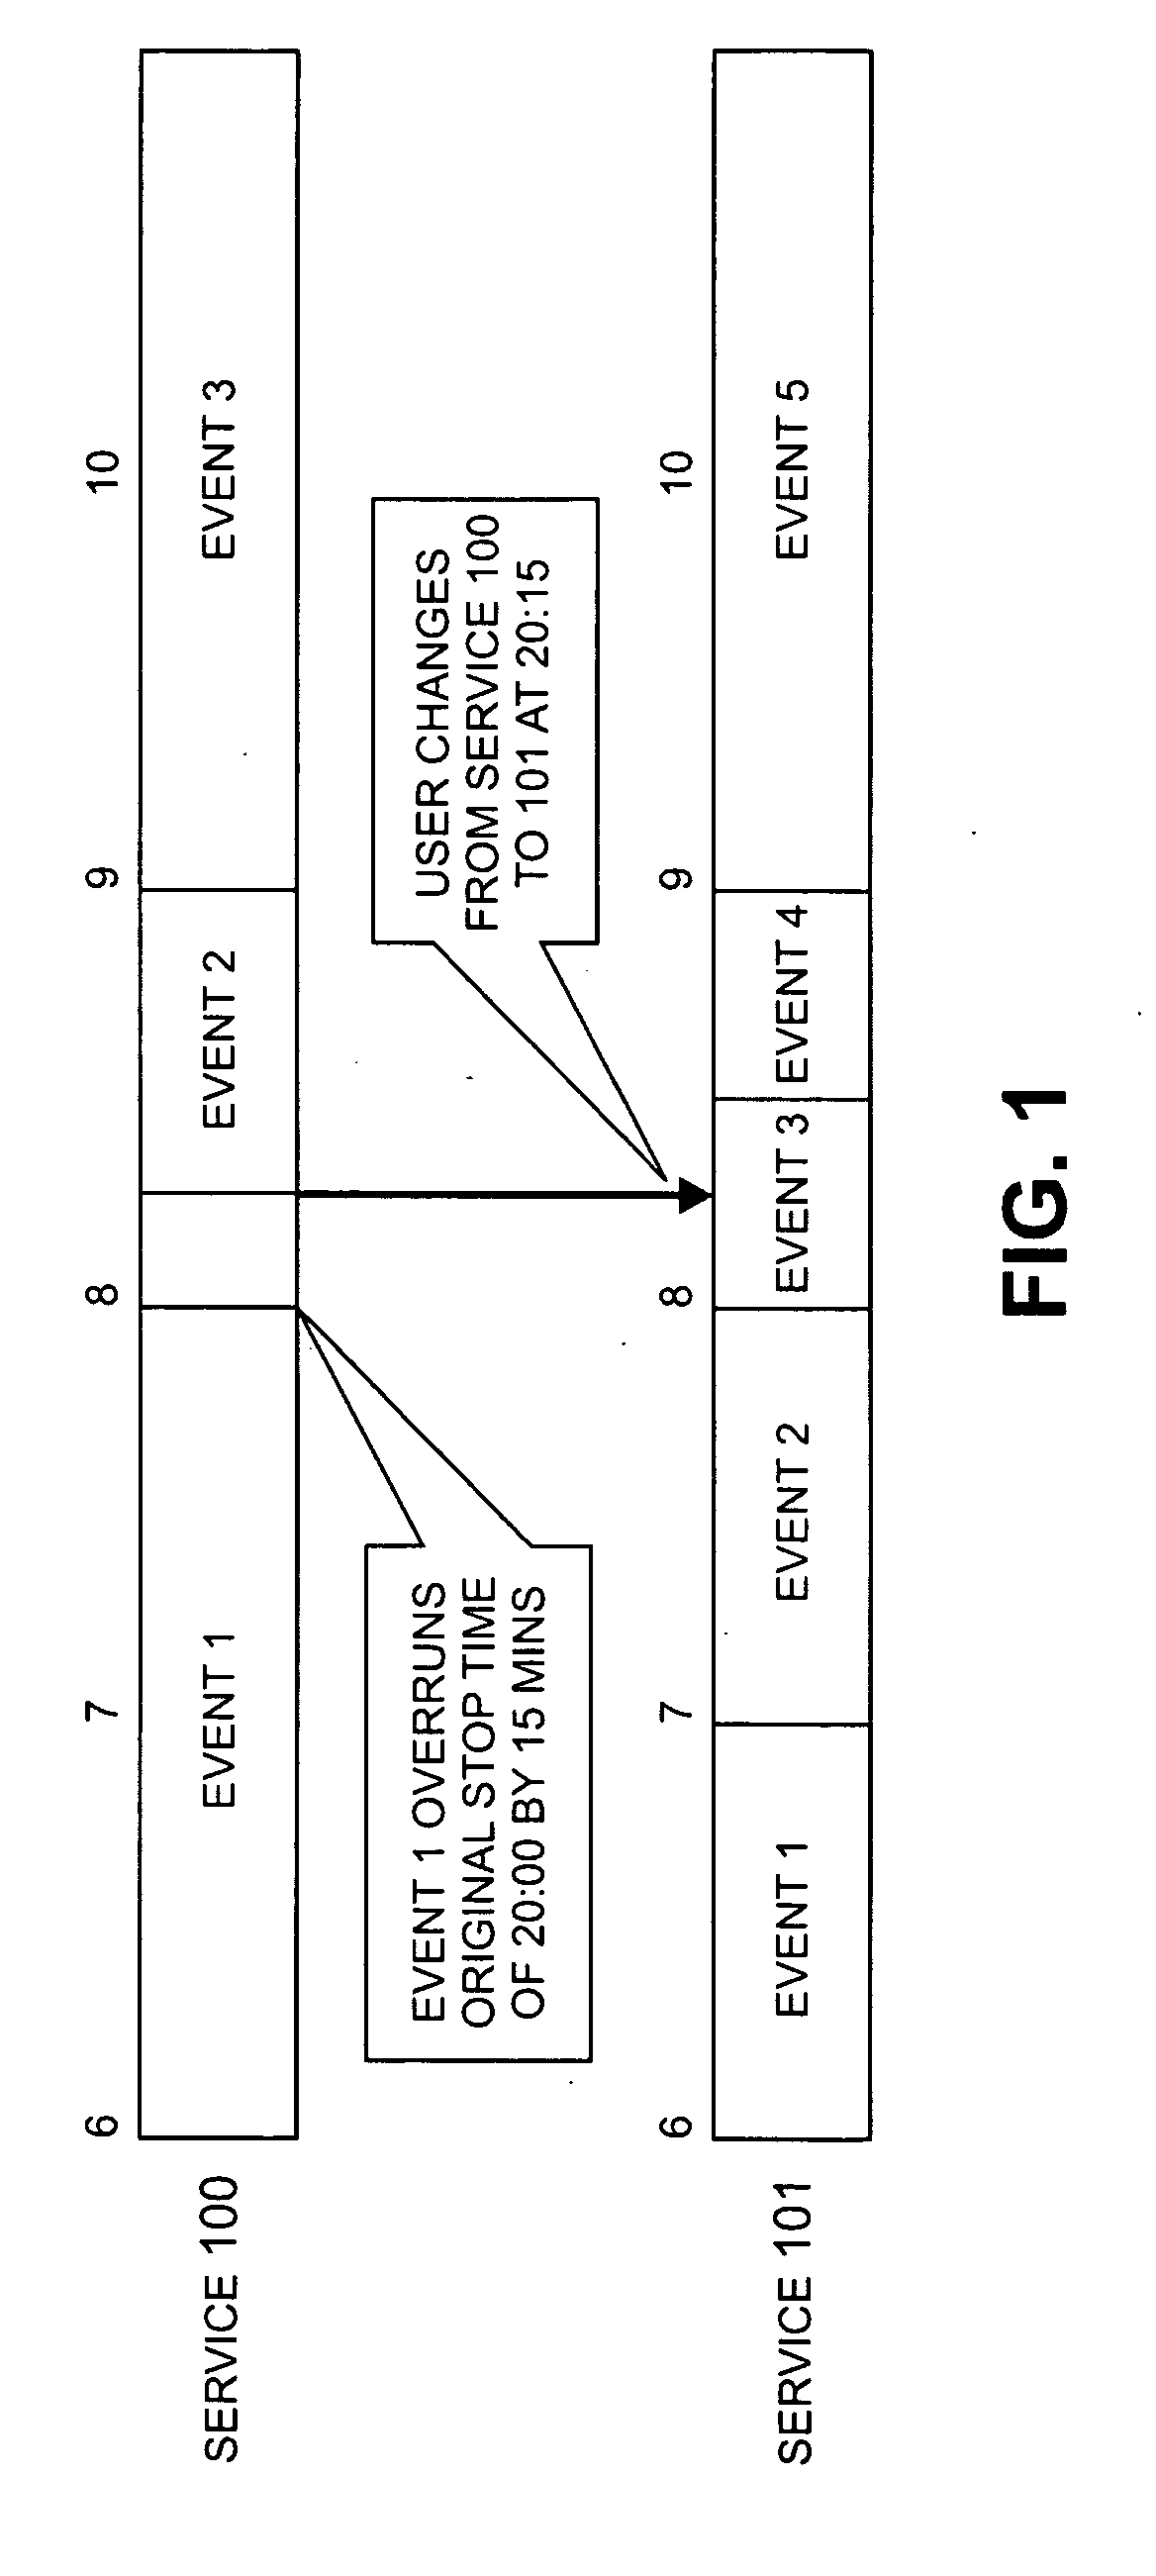 Digital video recorder having live-off-disk buffer for receiving missing portions of buffered events